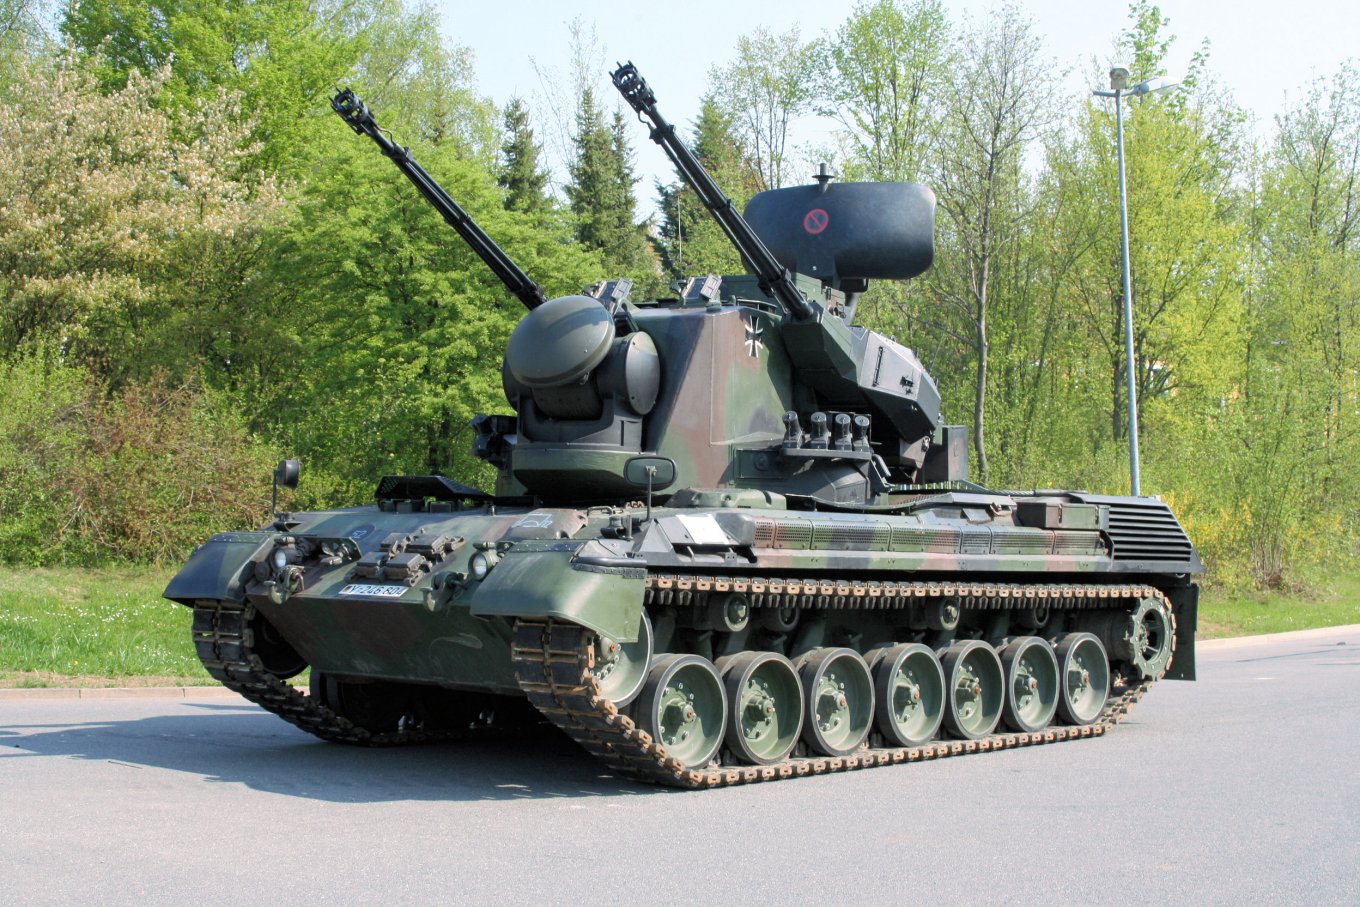 Gepard 1A2 of the German Army, Germany to Deliver the First Batch of Gepard Anti-Aircraft Tanks in Ukraine in Six Weeks, Defense Express